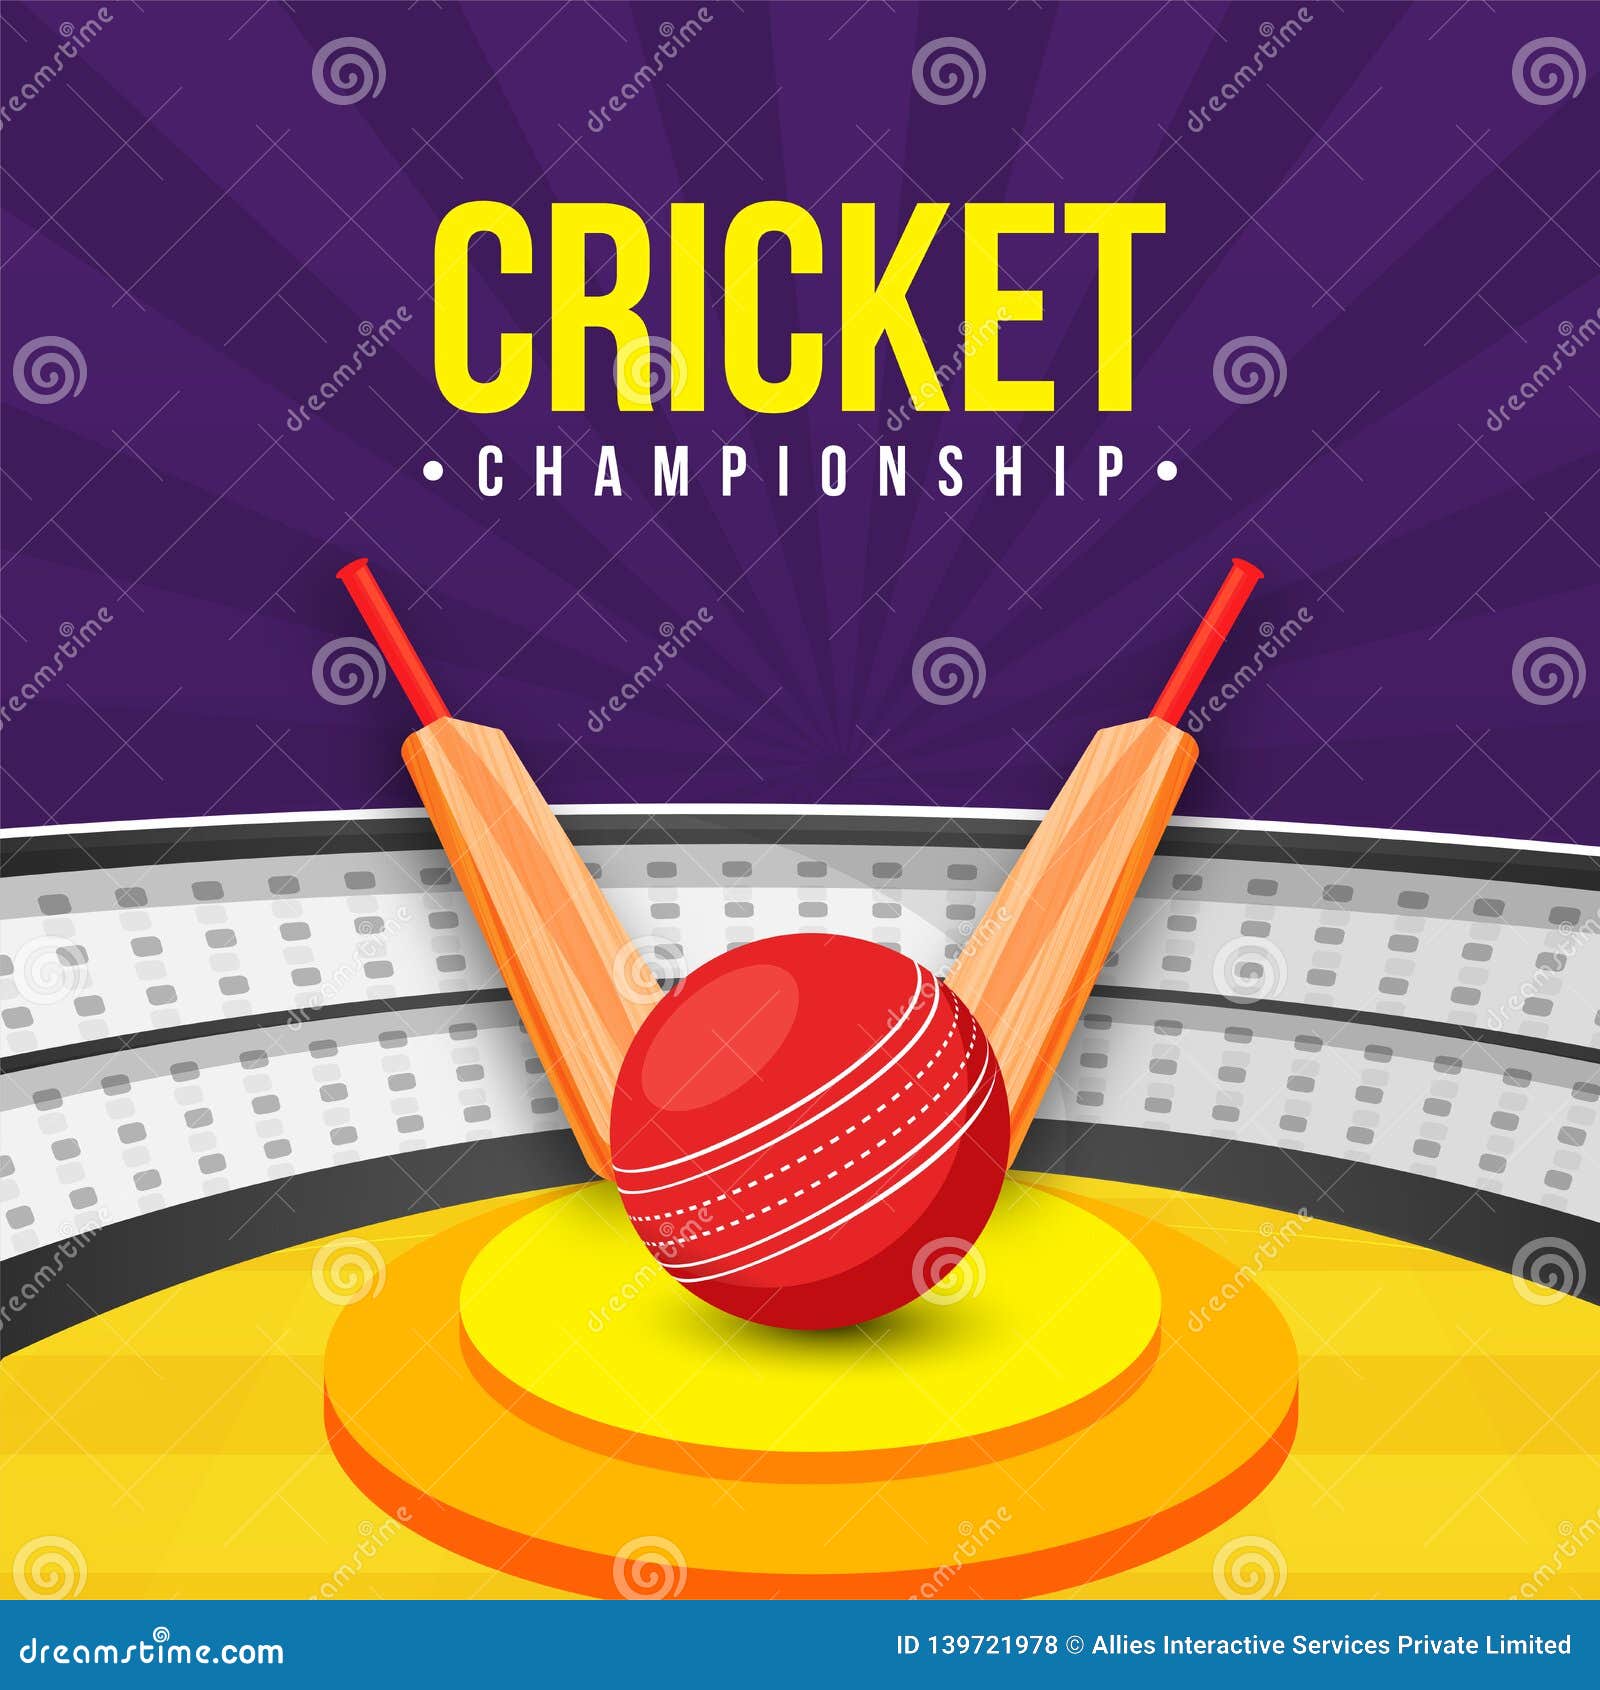 Flat Style Cricket Championship Template or Poster Design. Stock